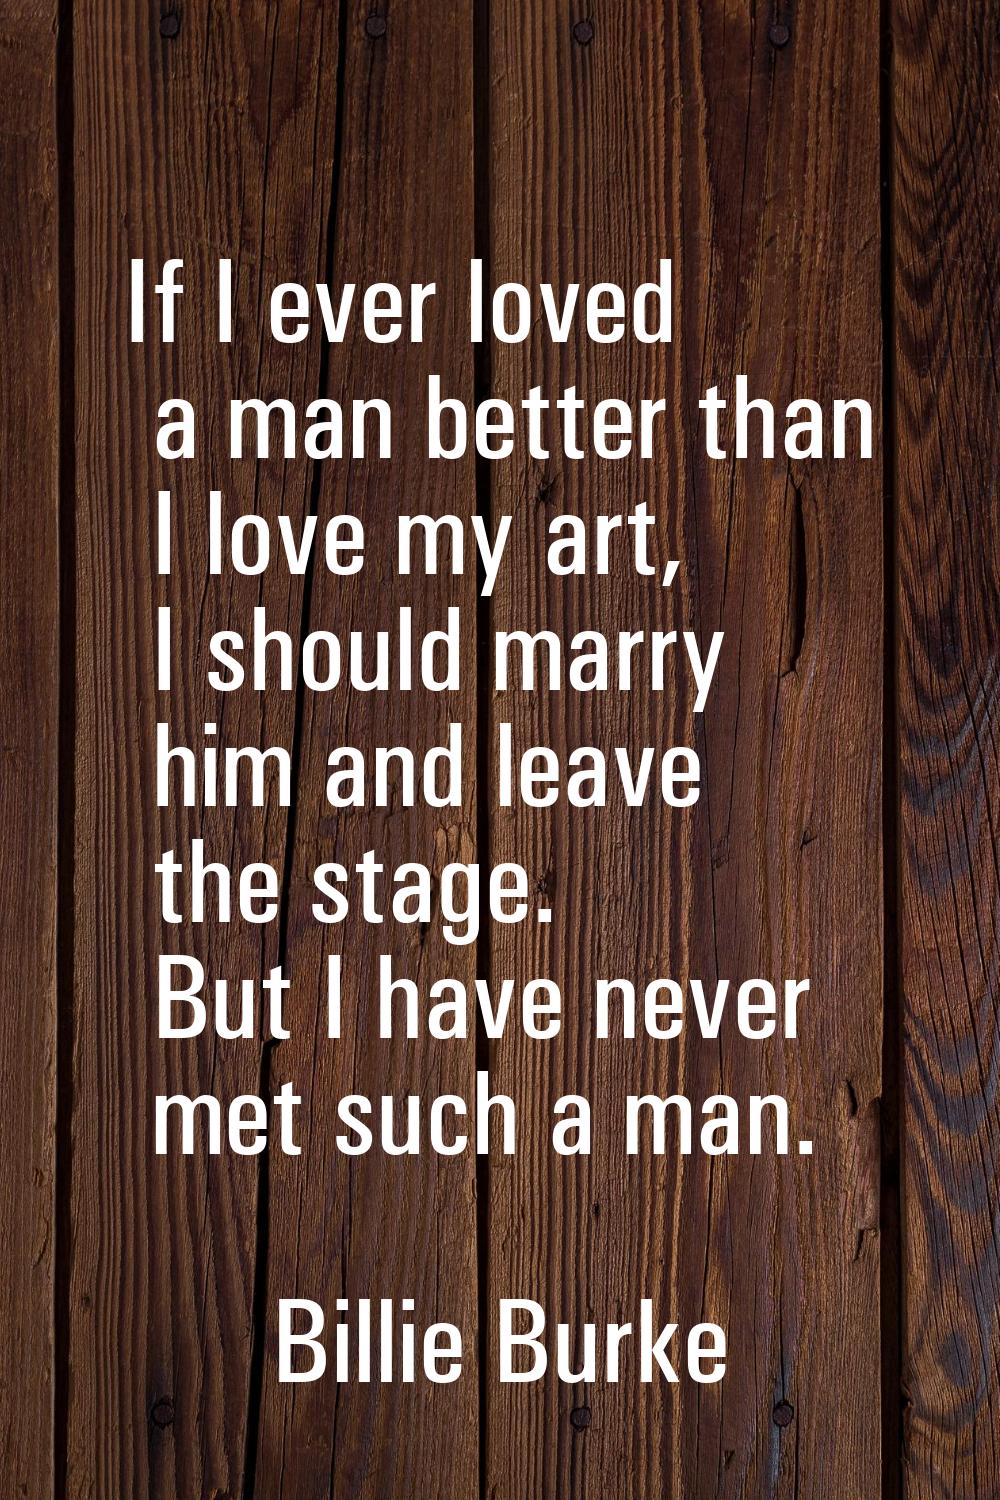 If I ever loved a man better than I love my art, I should marry him and leave the stage. But I have